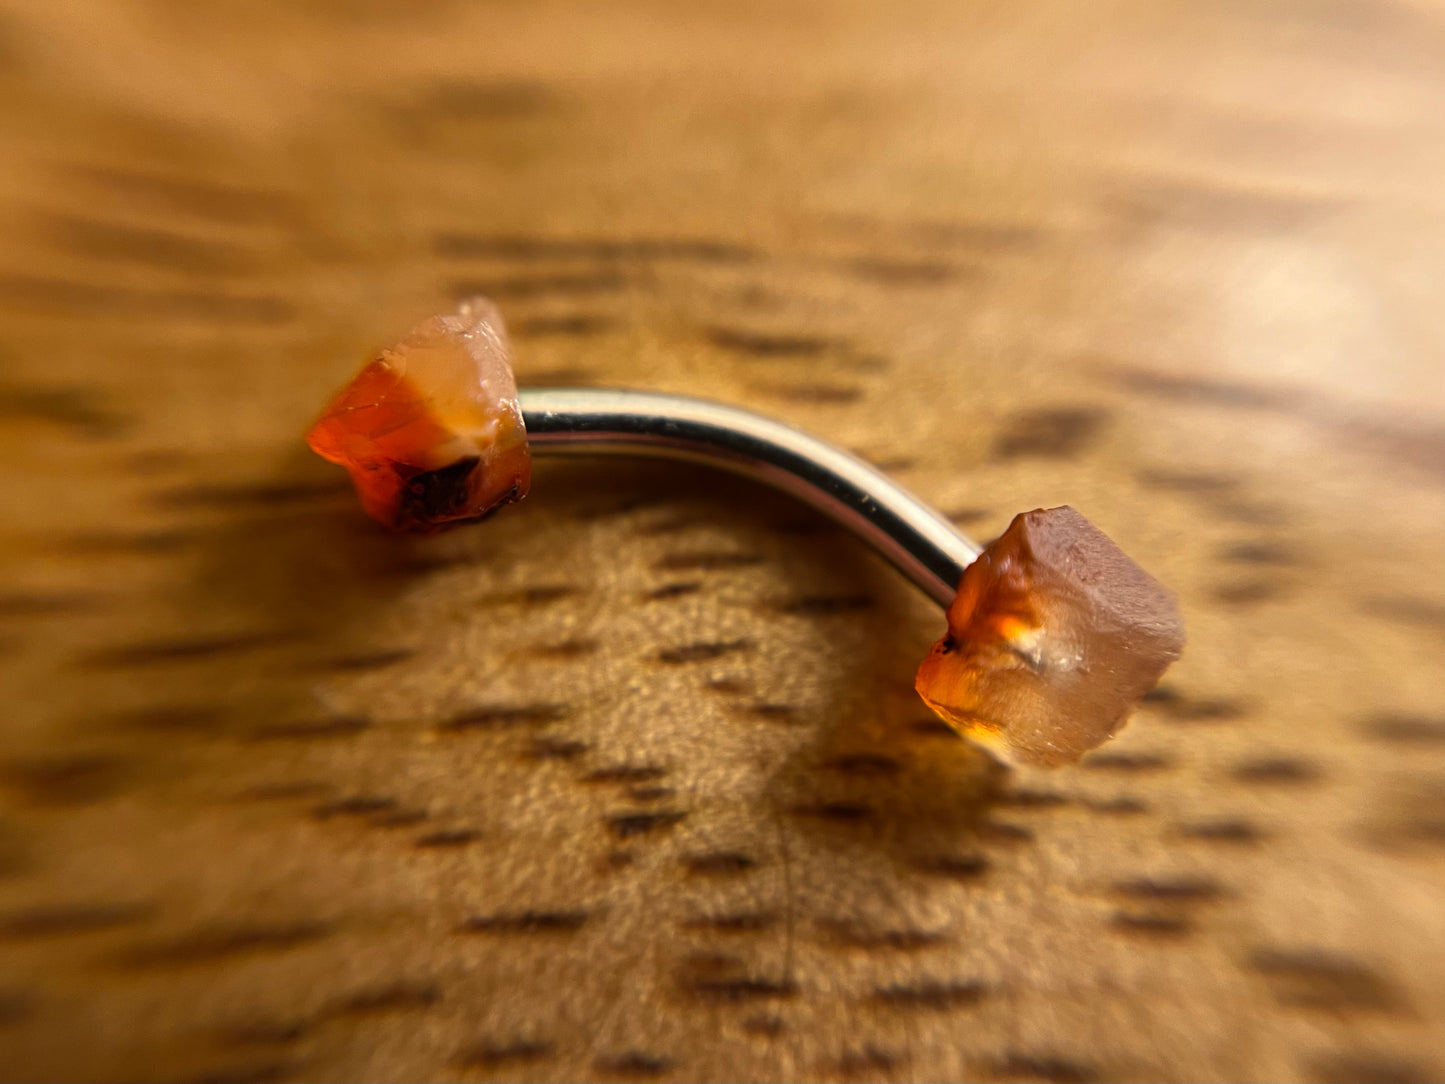 Carnelian Barbell 1.2mm, 16g Carnelian Bar Bell, 8mm-10mm Internally Threaded Surgical Steel Straight Or Curved Bar, 3mm Raw Natural Crystal